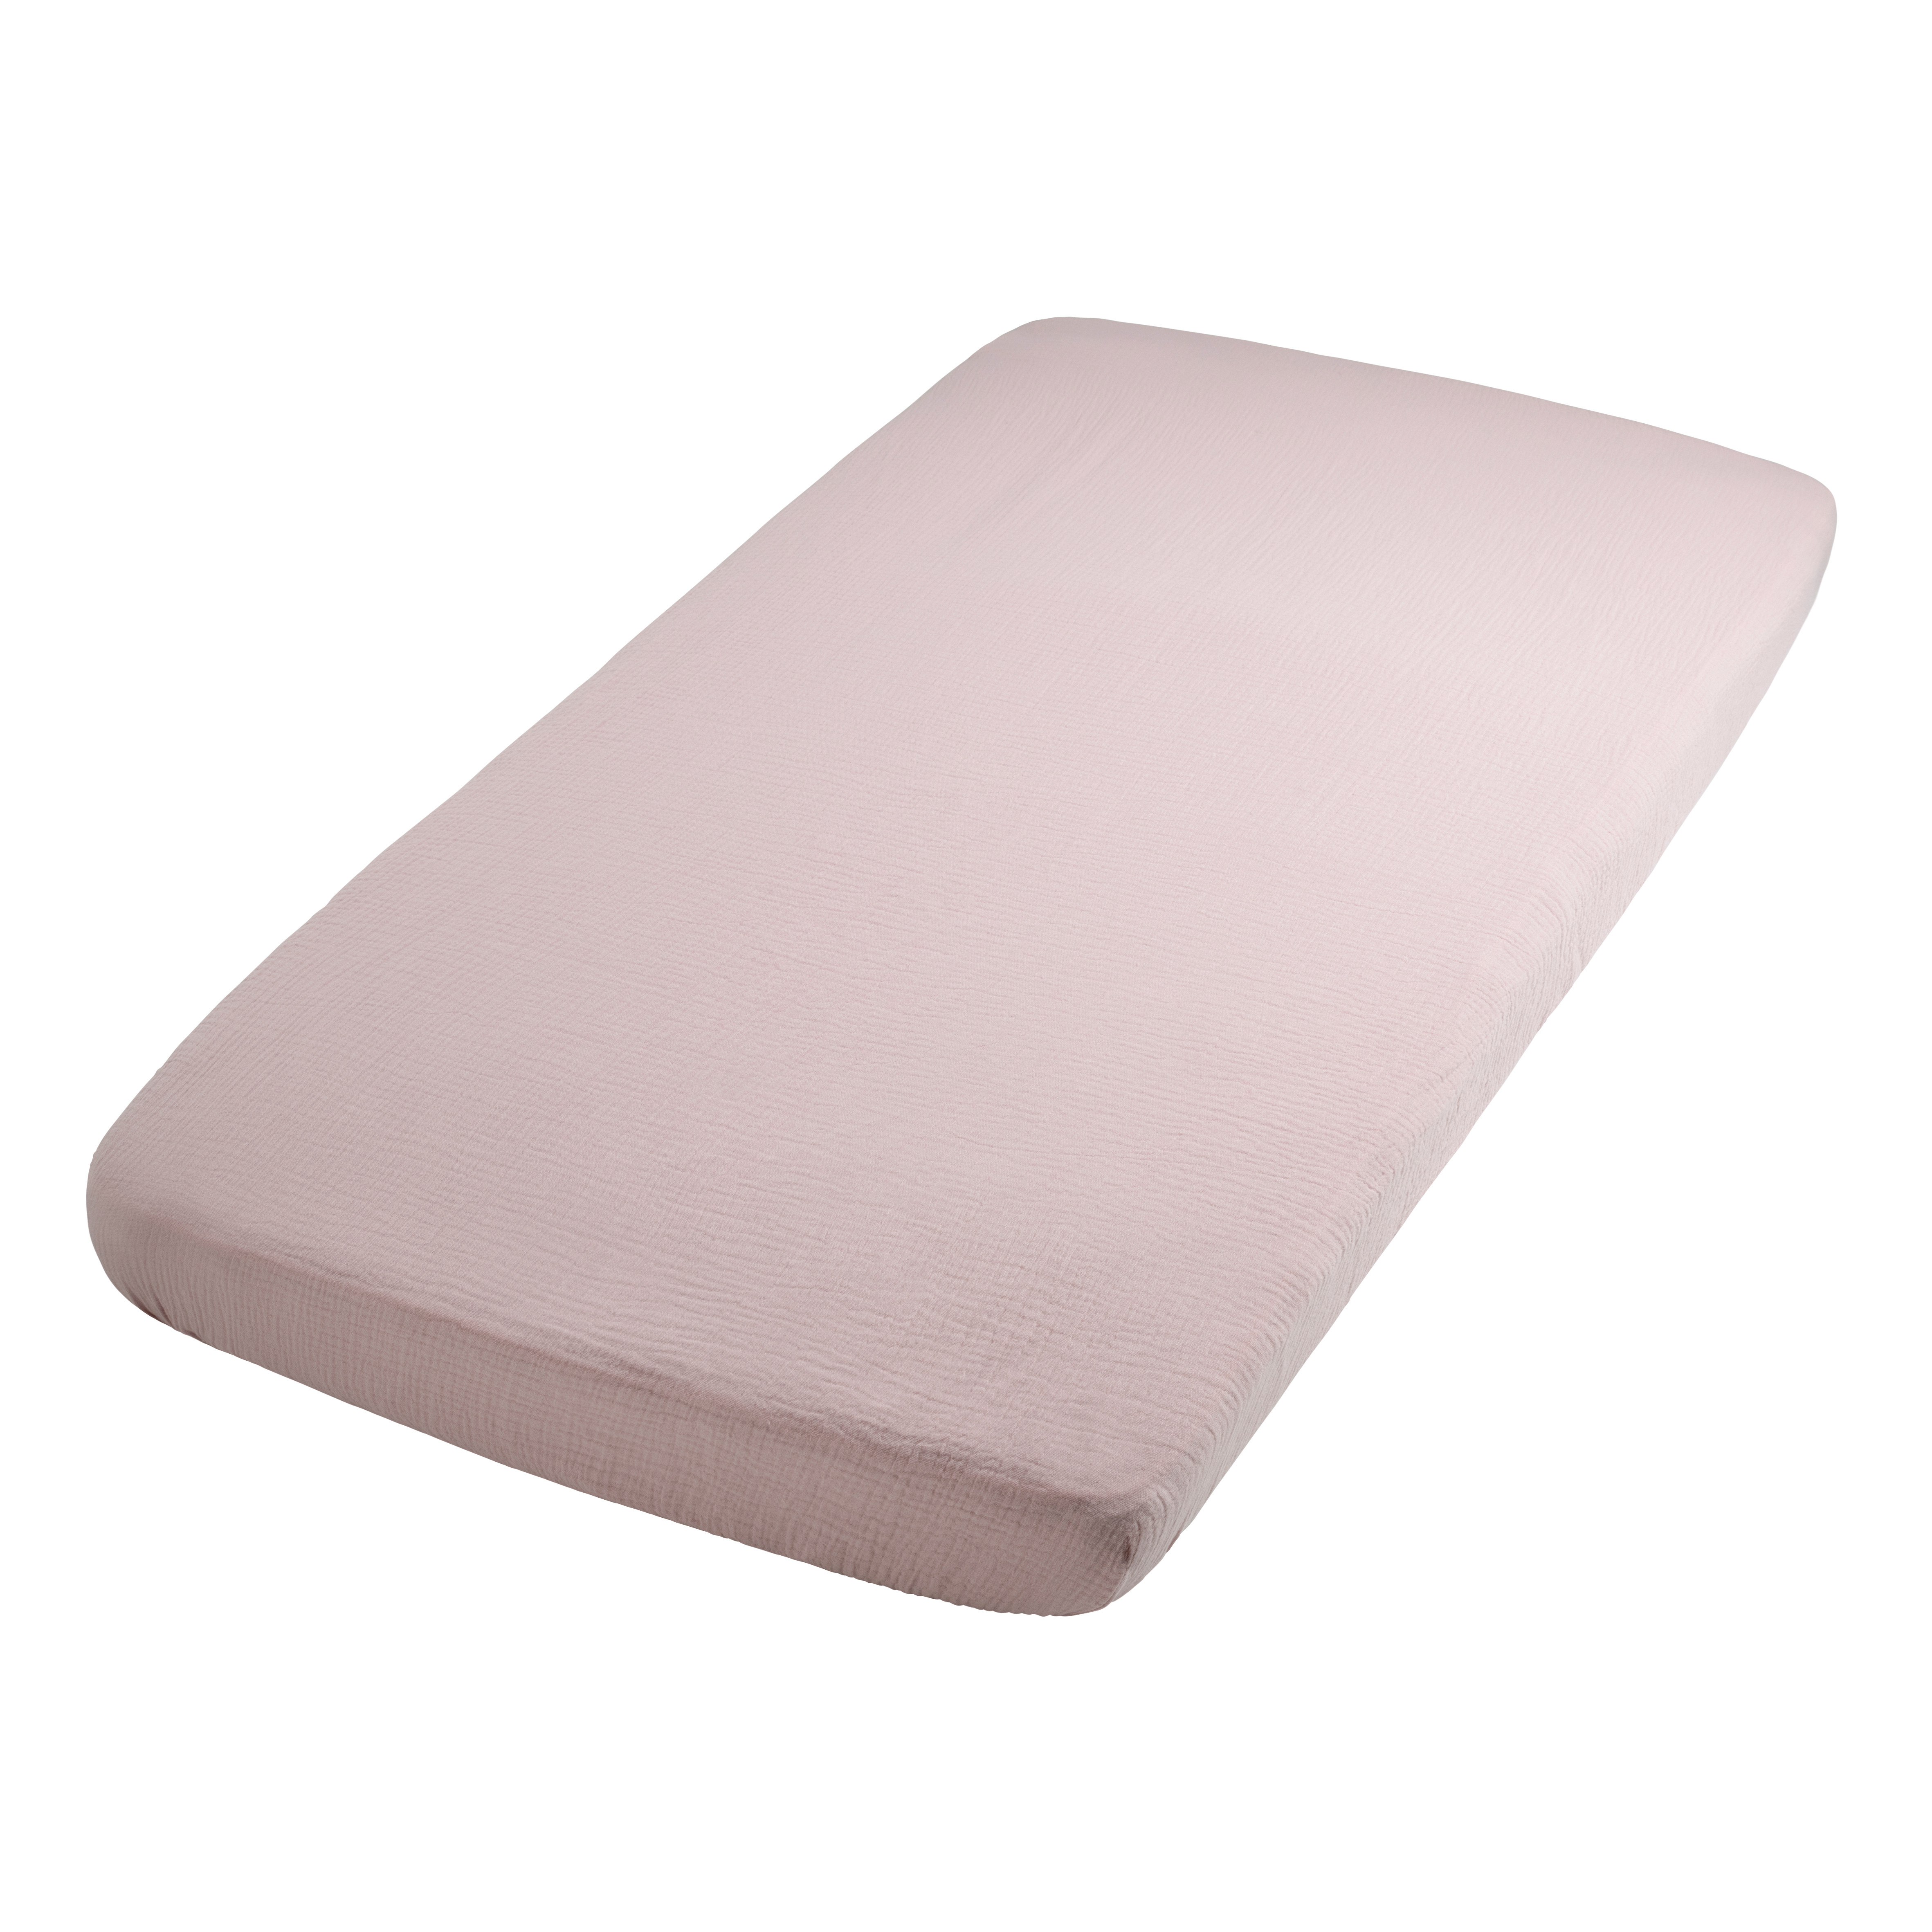 Fitted sheet Fresh ECO old pink - 60x120